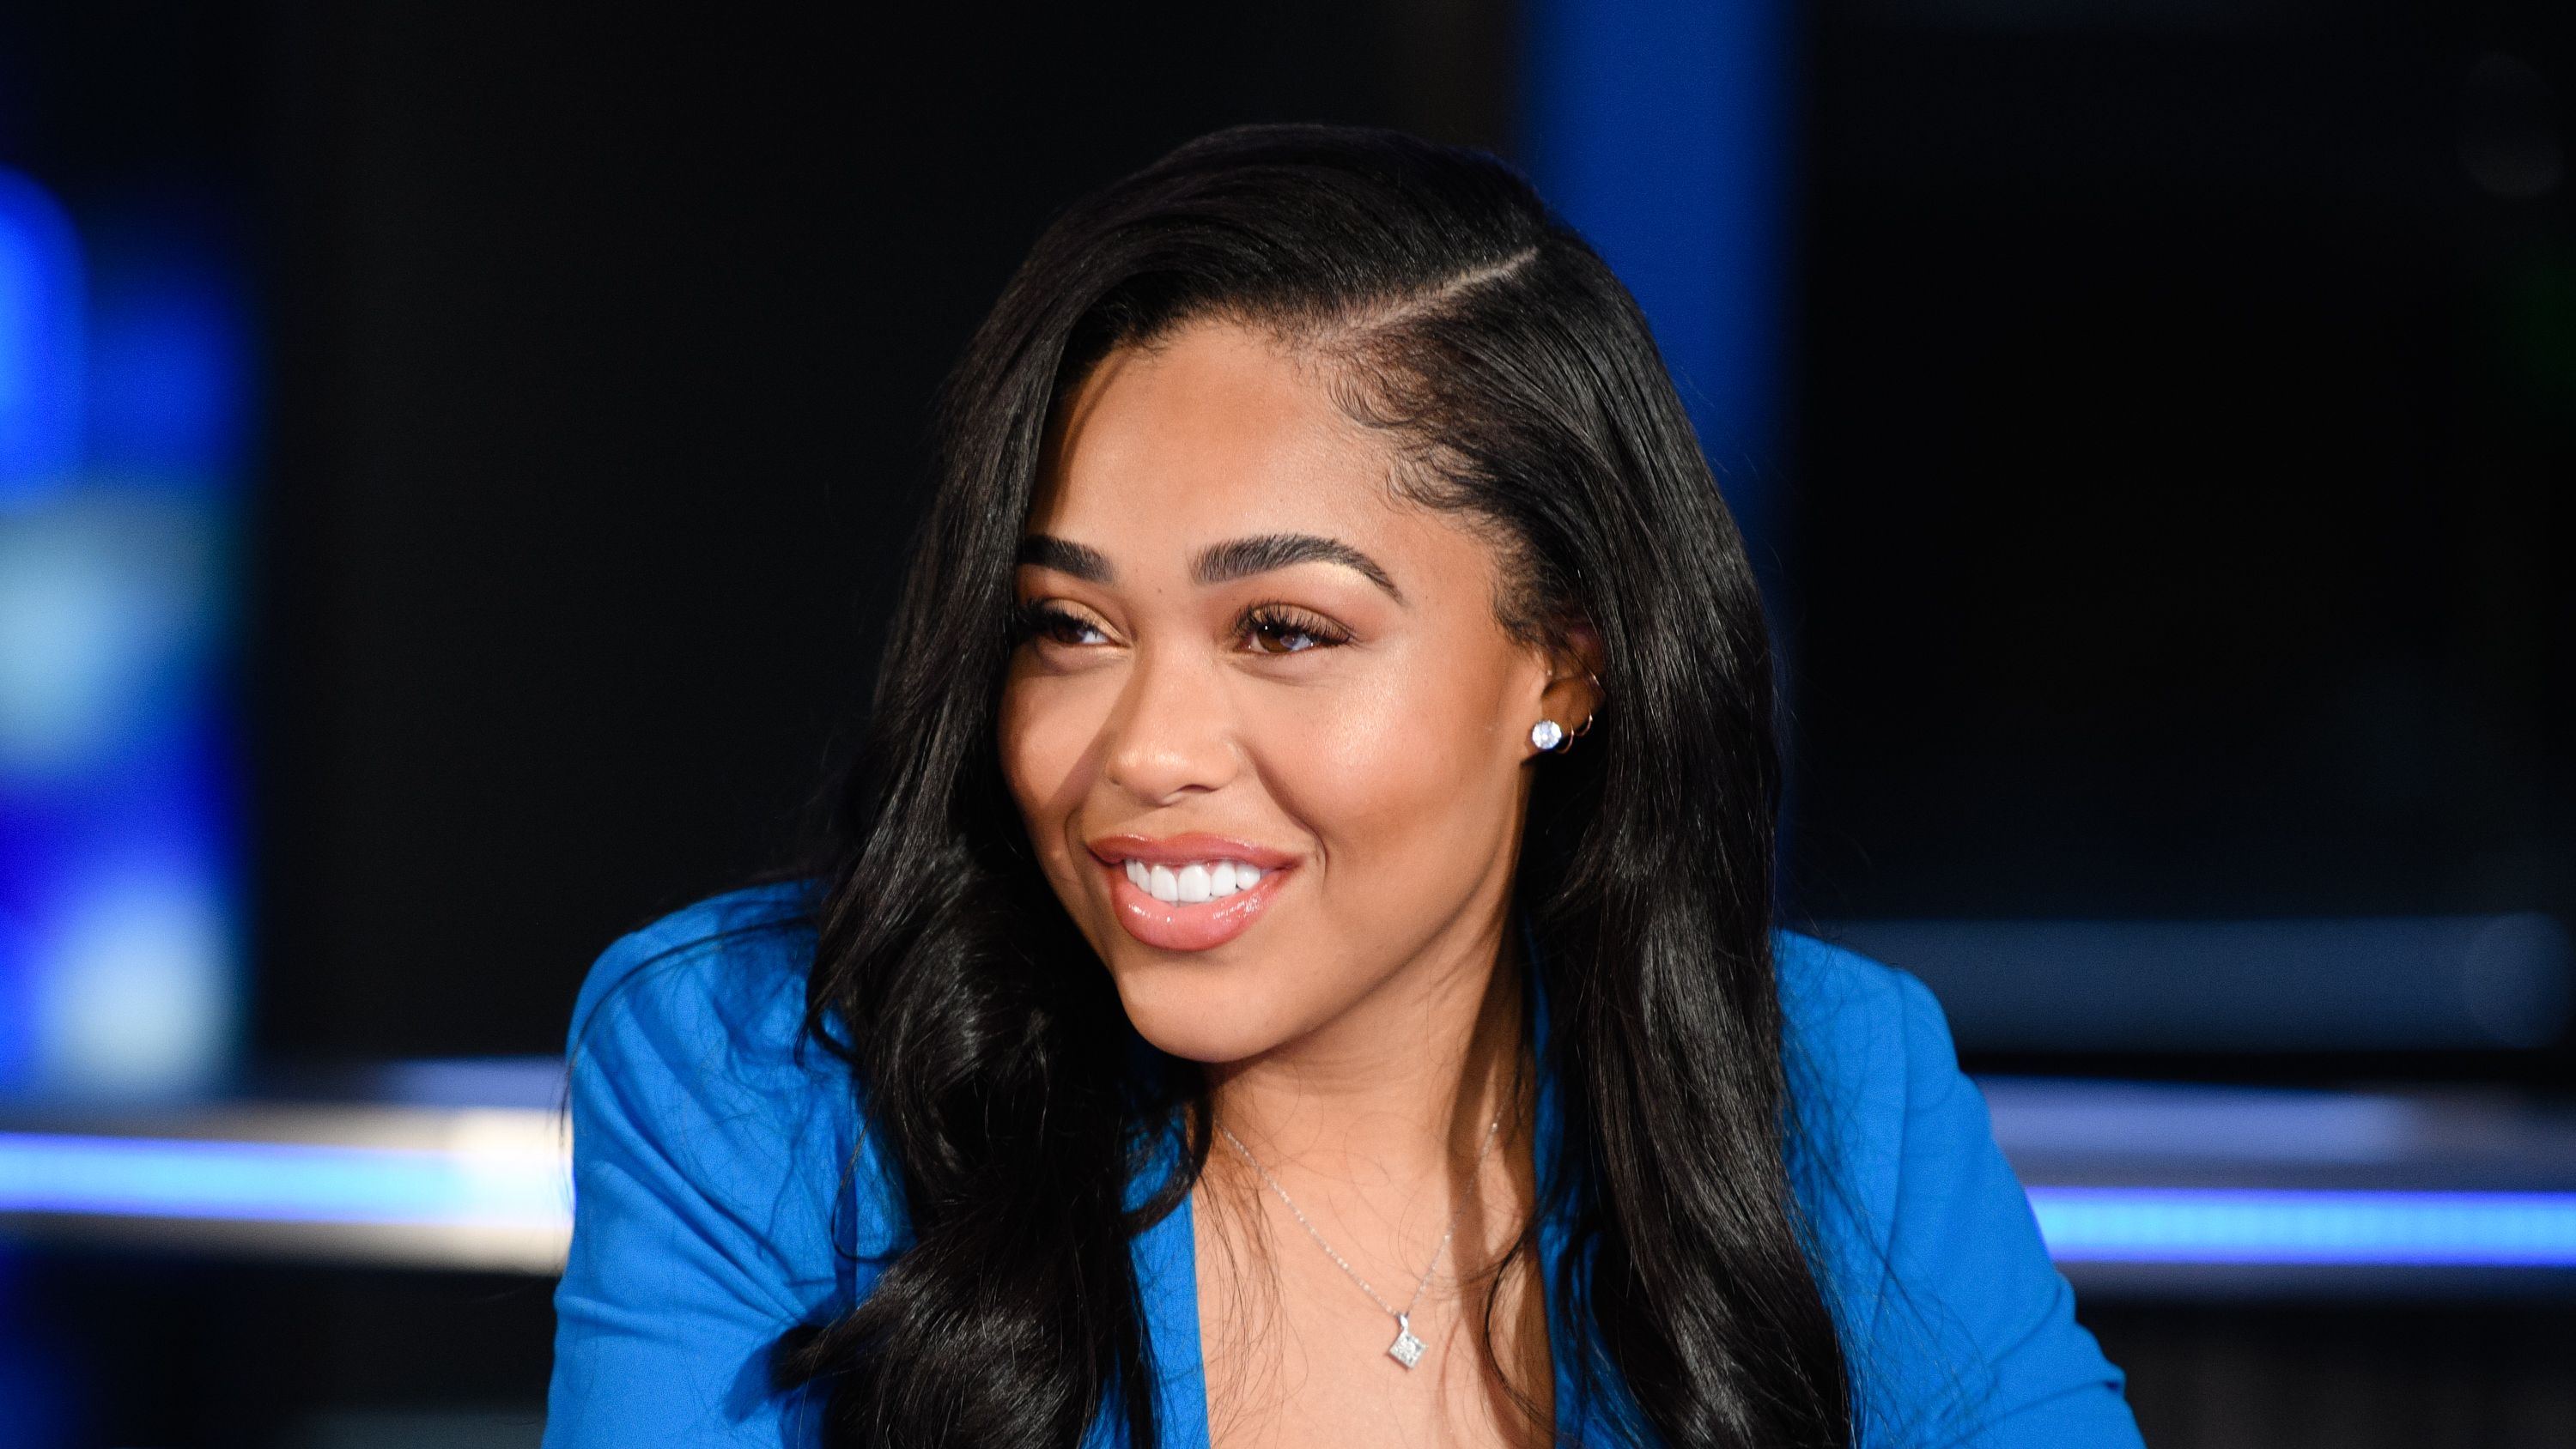 Jordyn Woods Says Working Out Helped Her Through Depression